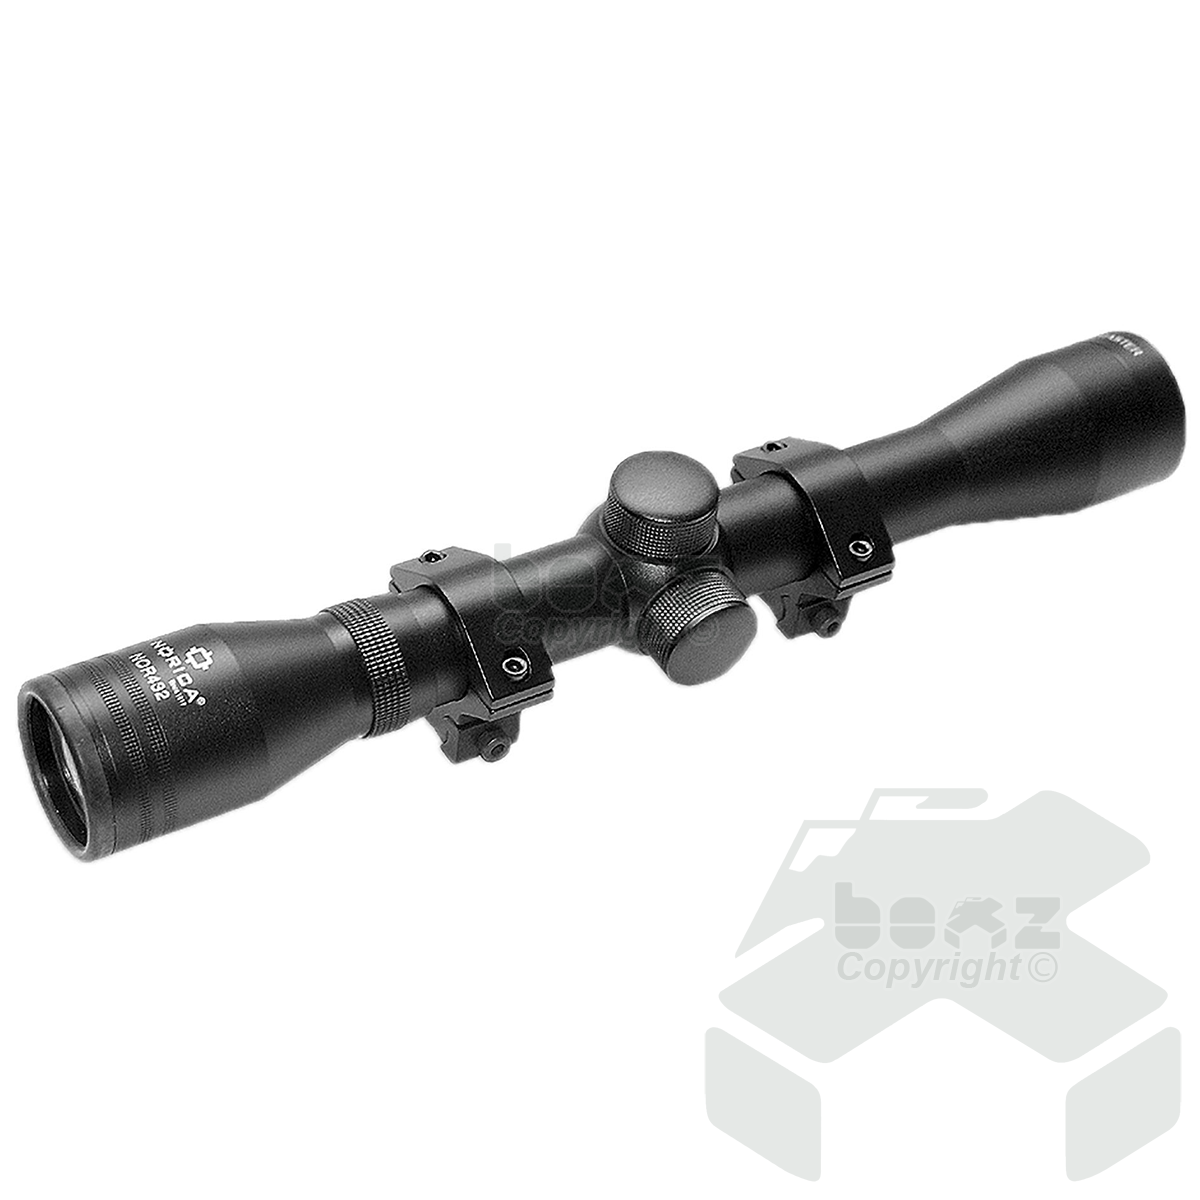 Norica Scope 4x32 with Two-piece Mounts